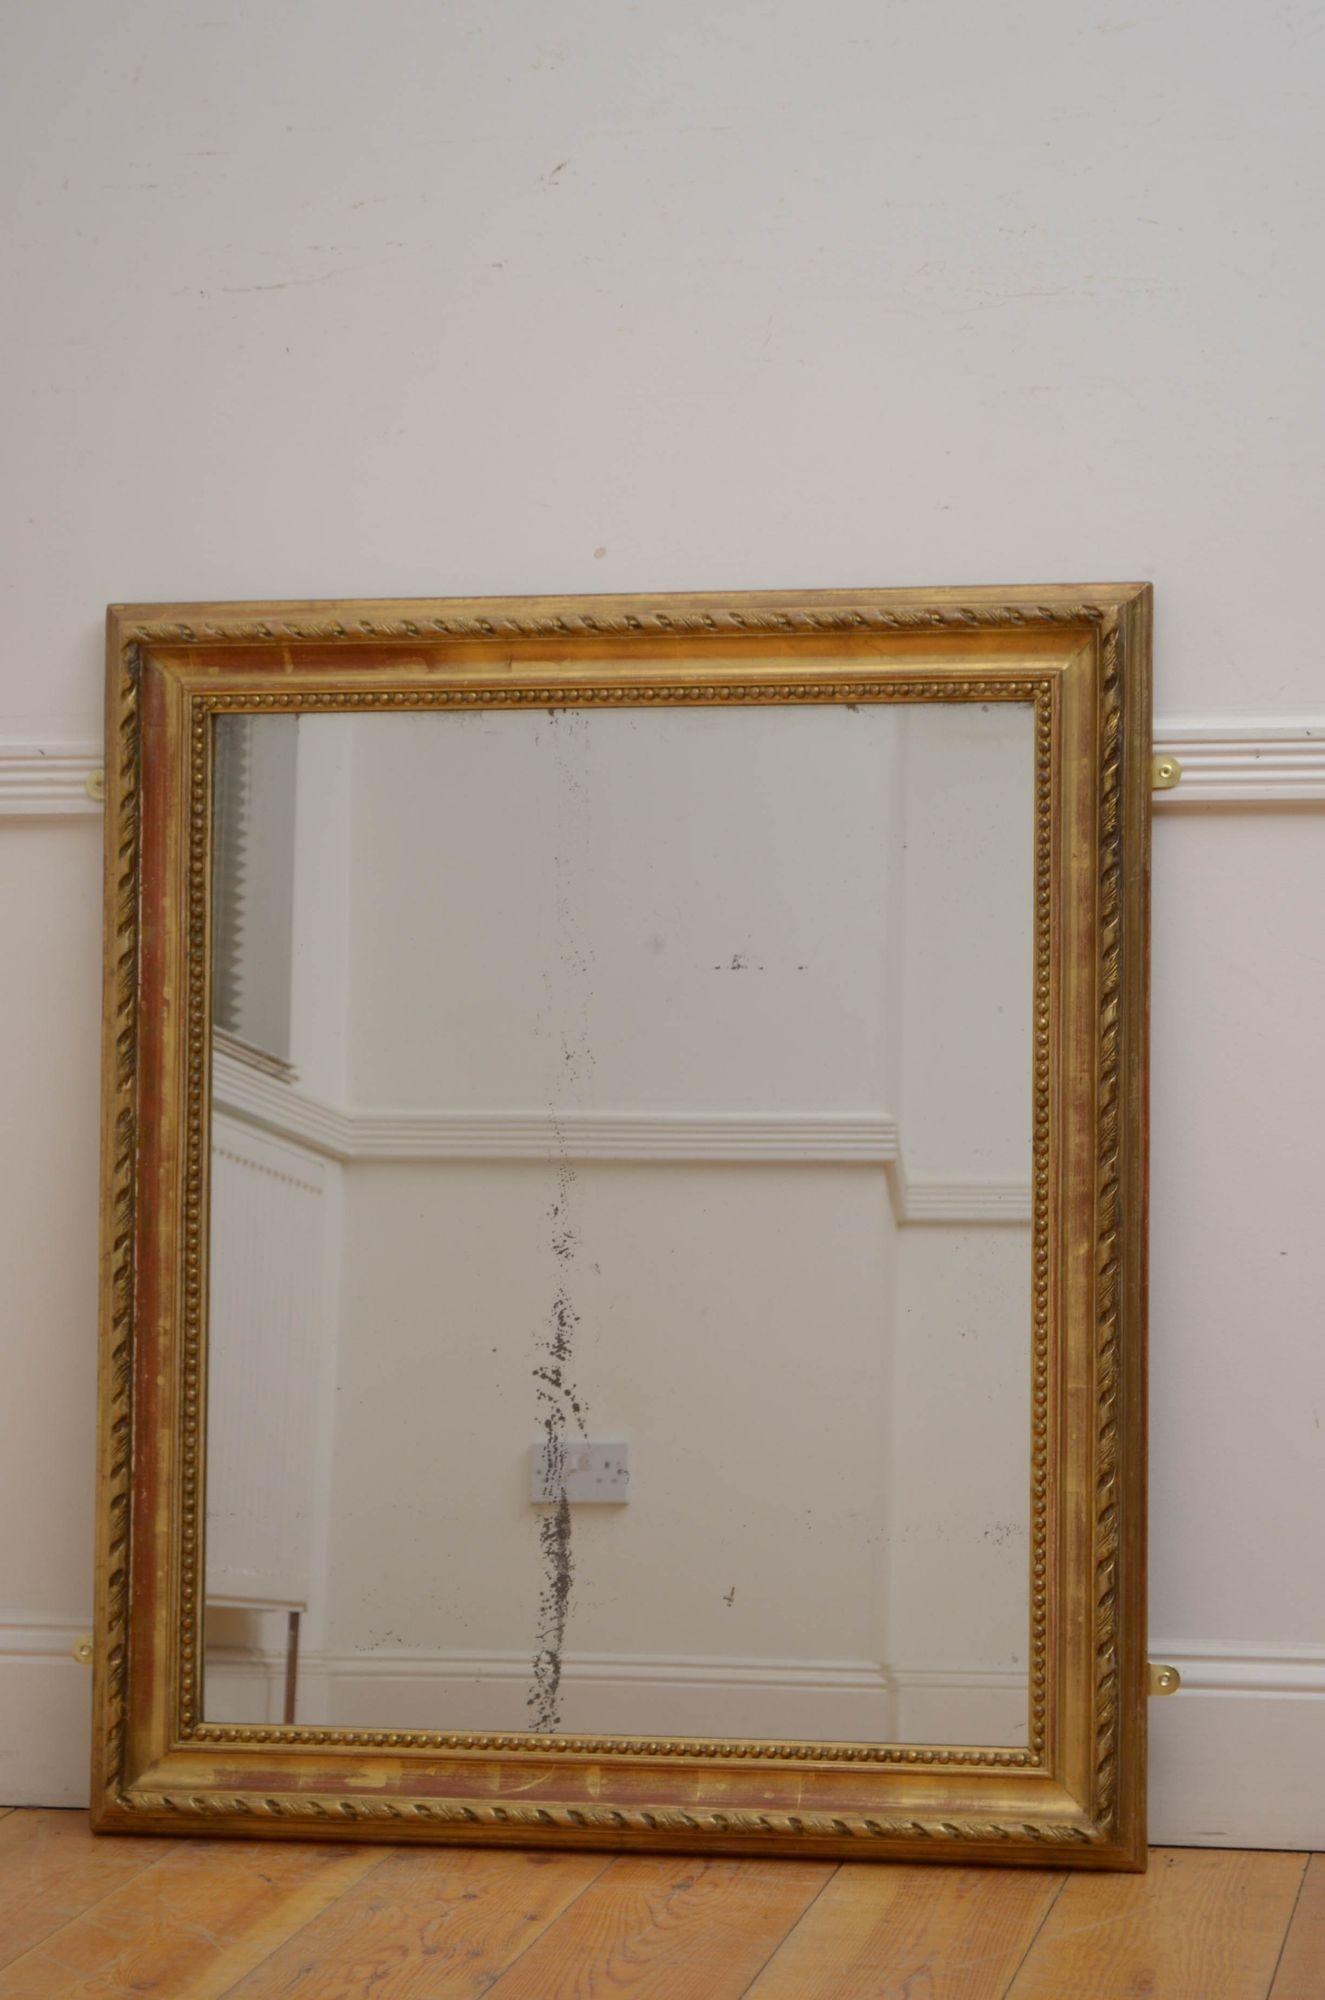 Sn5459 Attractive 19th century mirror which can be positioned horizontally or vertically, having original glass with some foxing in moulded and gilded frame with beaded inner edge and finely carved outer edge, all in home ready condition. c1870
H41